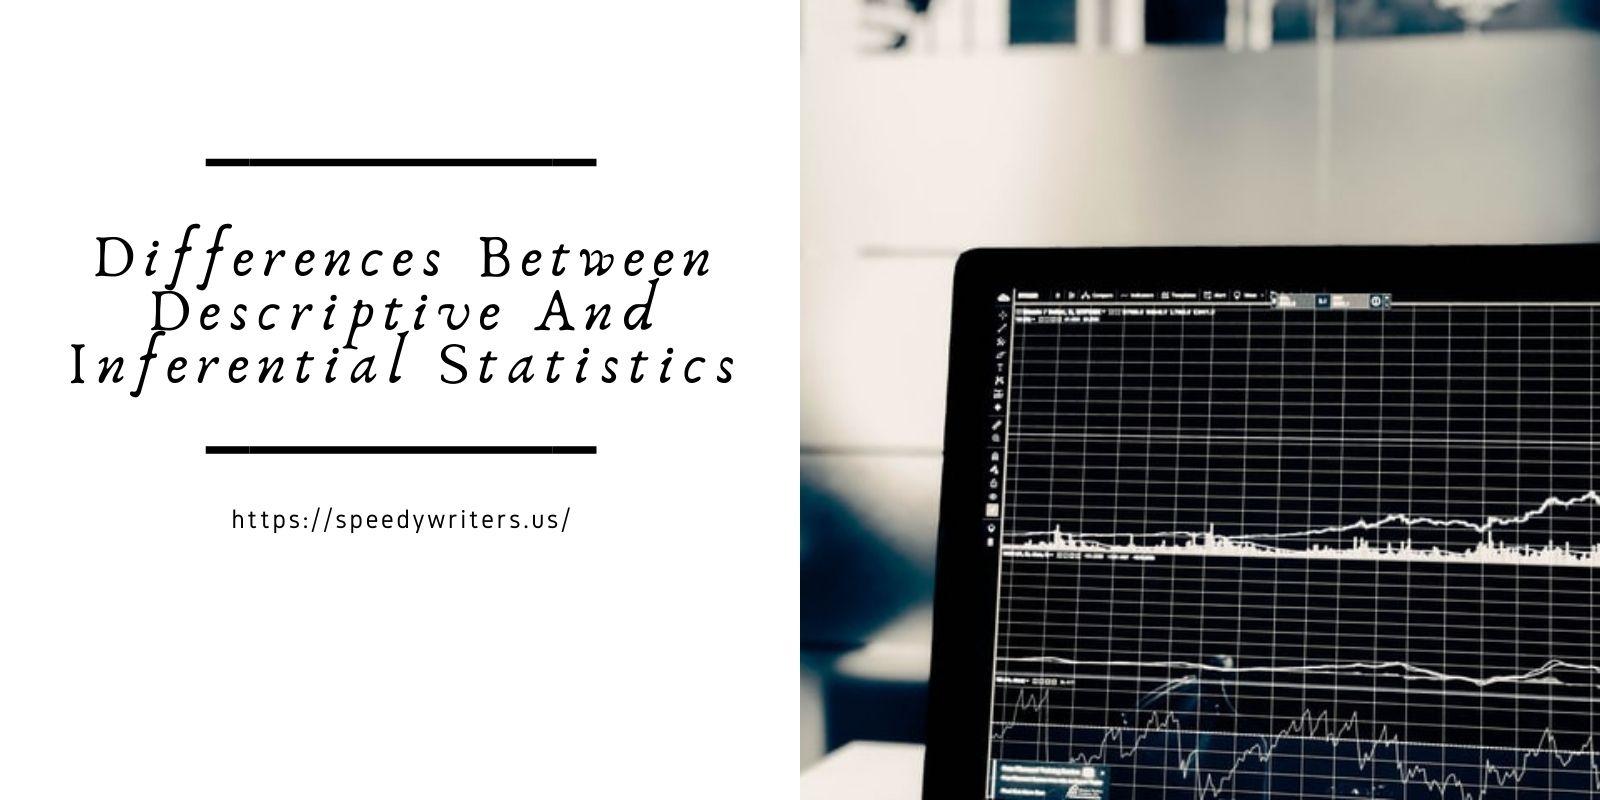 Differences Between Descriptive And Inferential Statistics